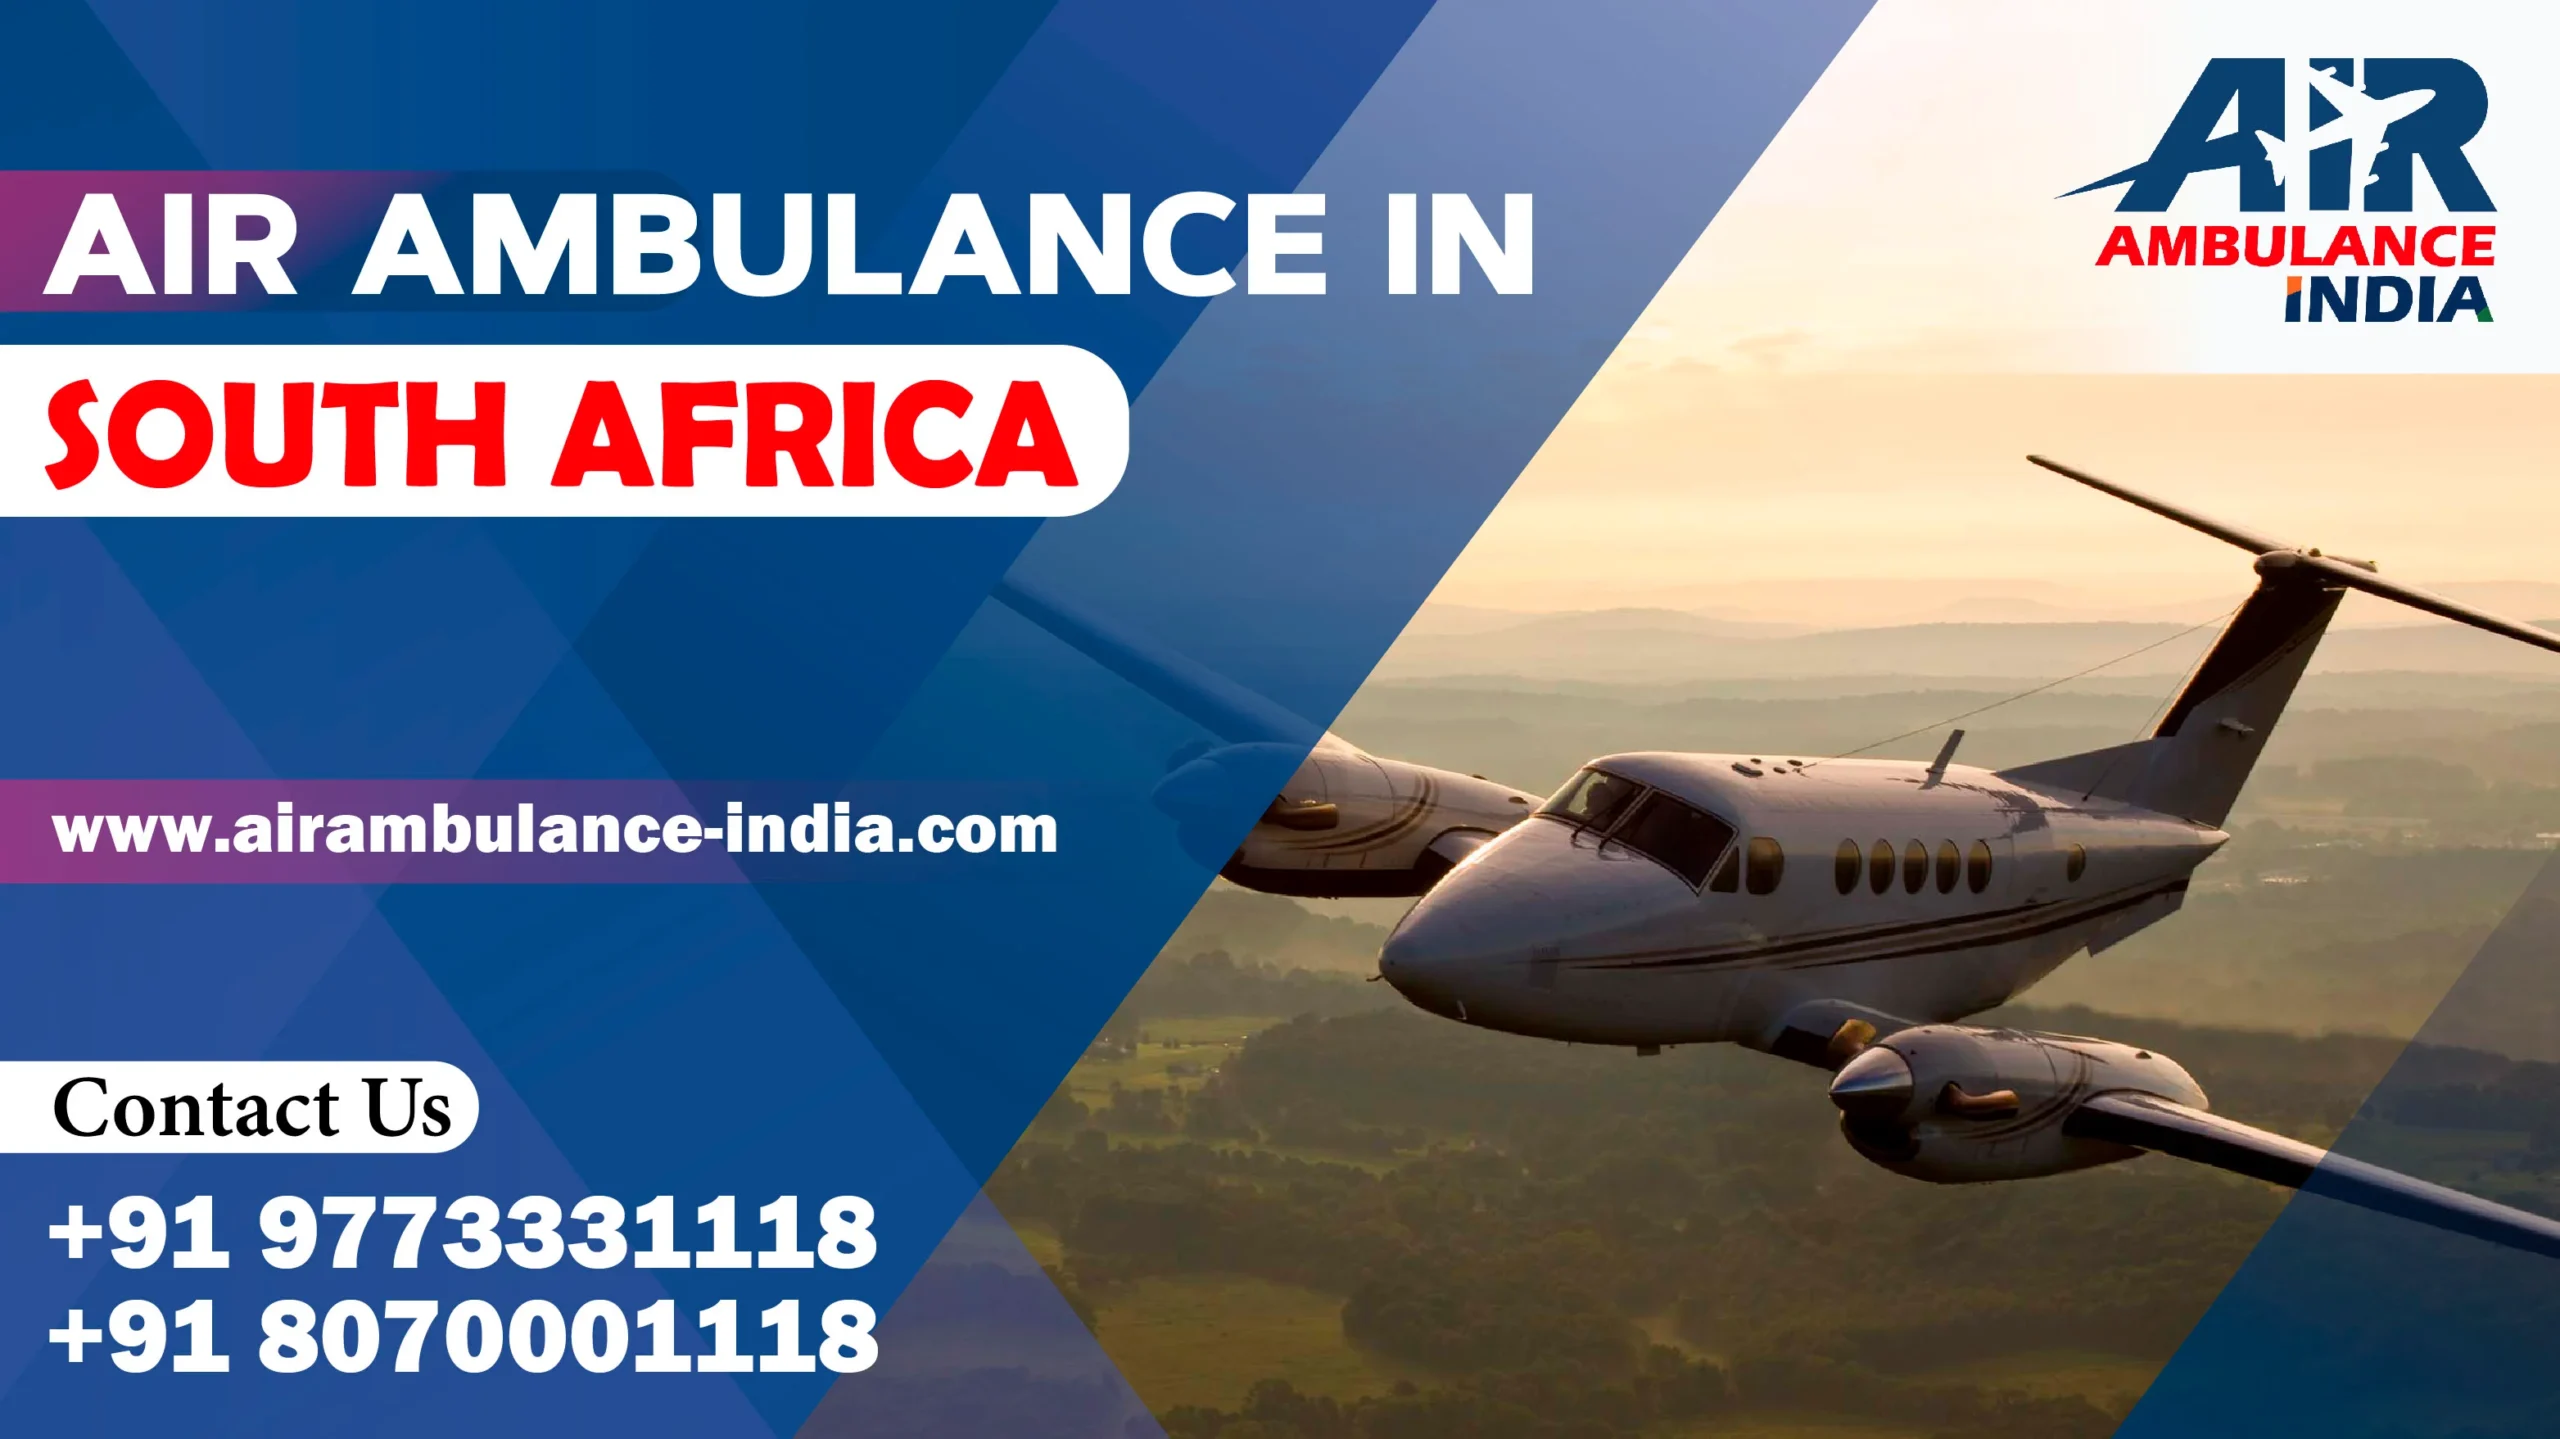 Air Ambulance Services in South Africa